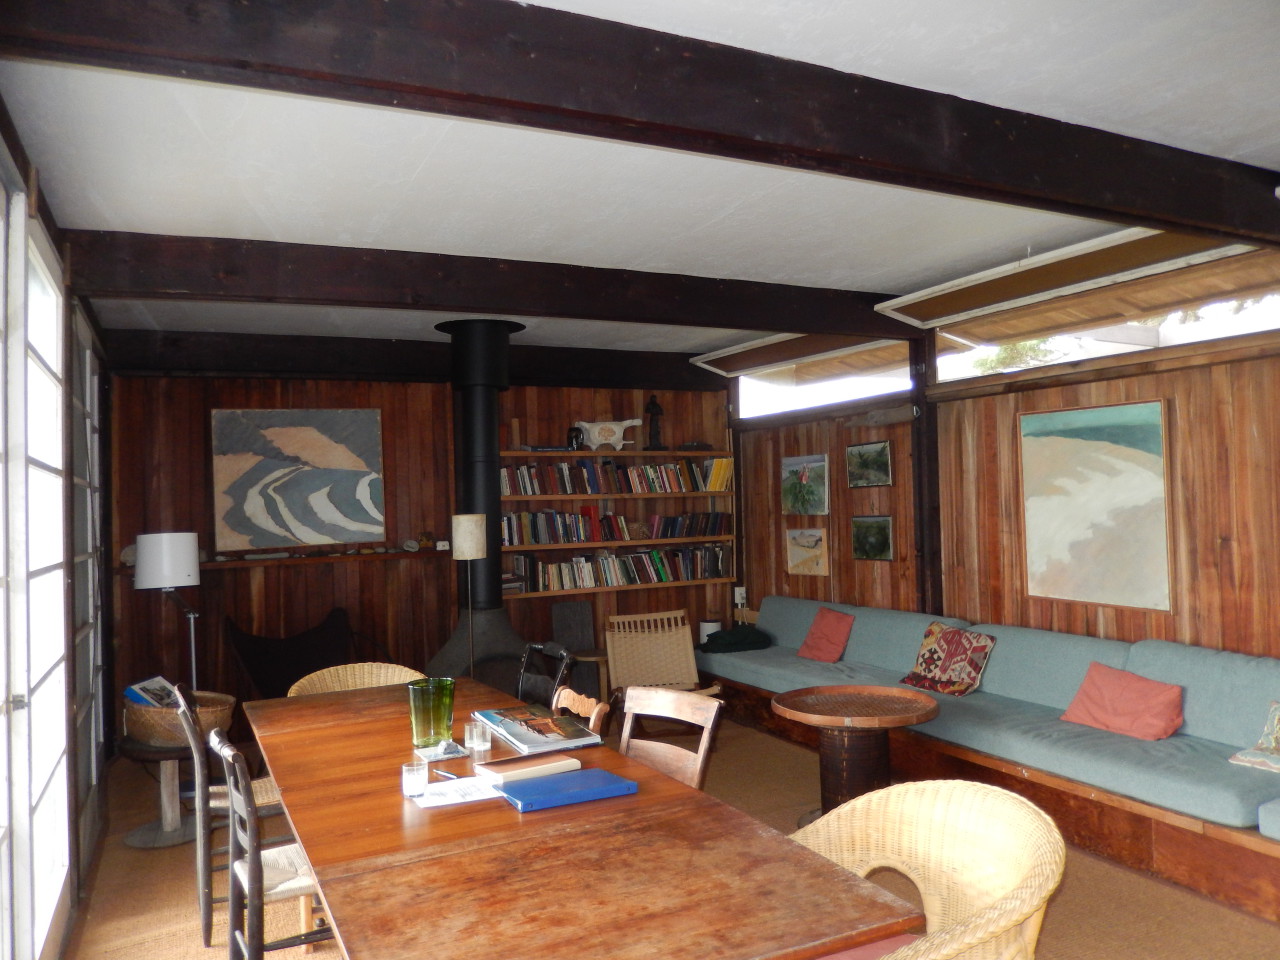 The living room of the Hatch house in Wellfleet, Mass. (Anthony Brooks/WBUR)